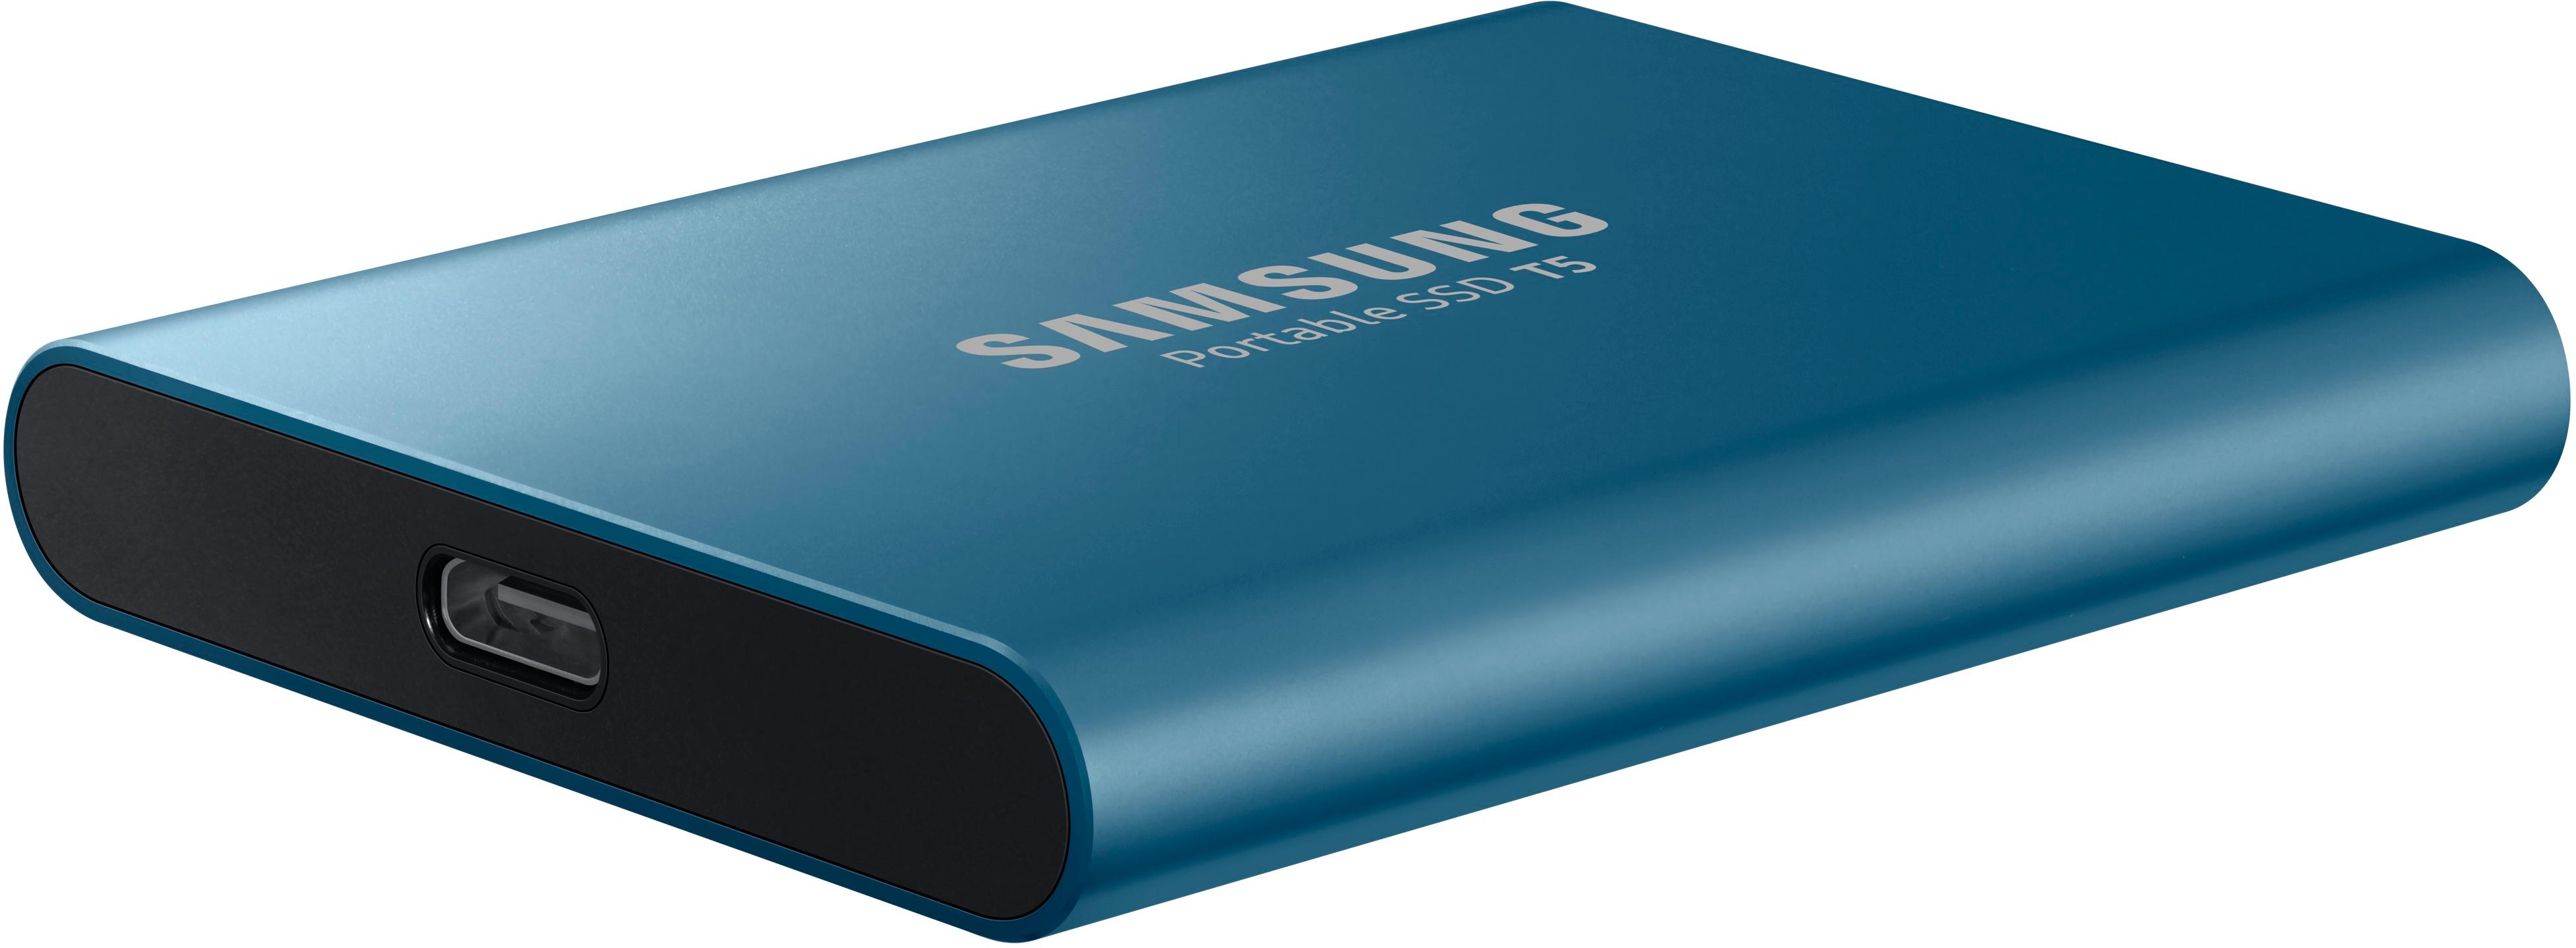 Best Buy: Samsung T5 250GB USB Type C Portable Solid Drive Alluring blue